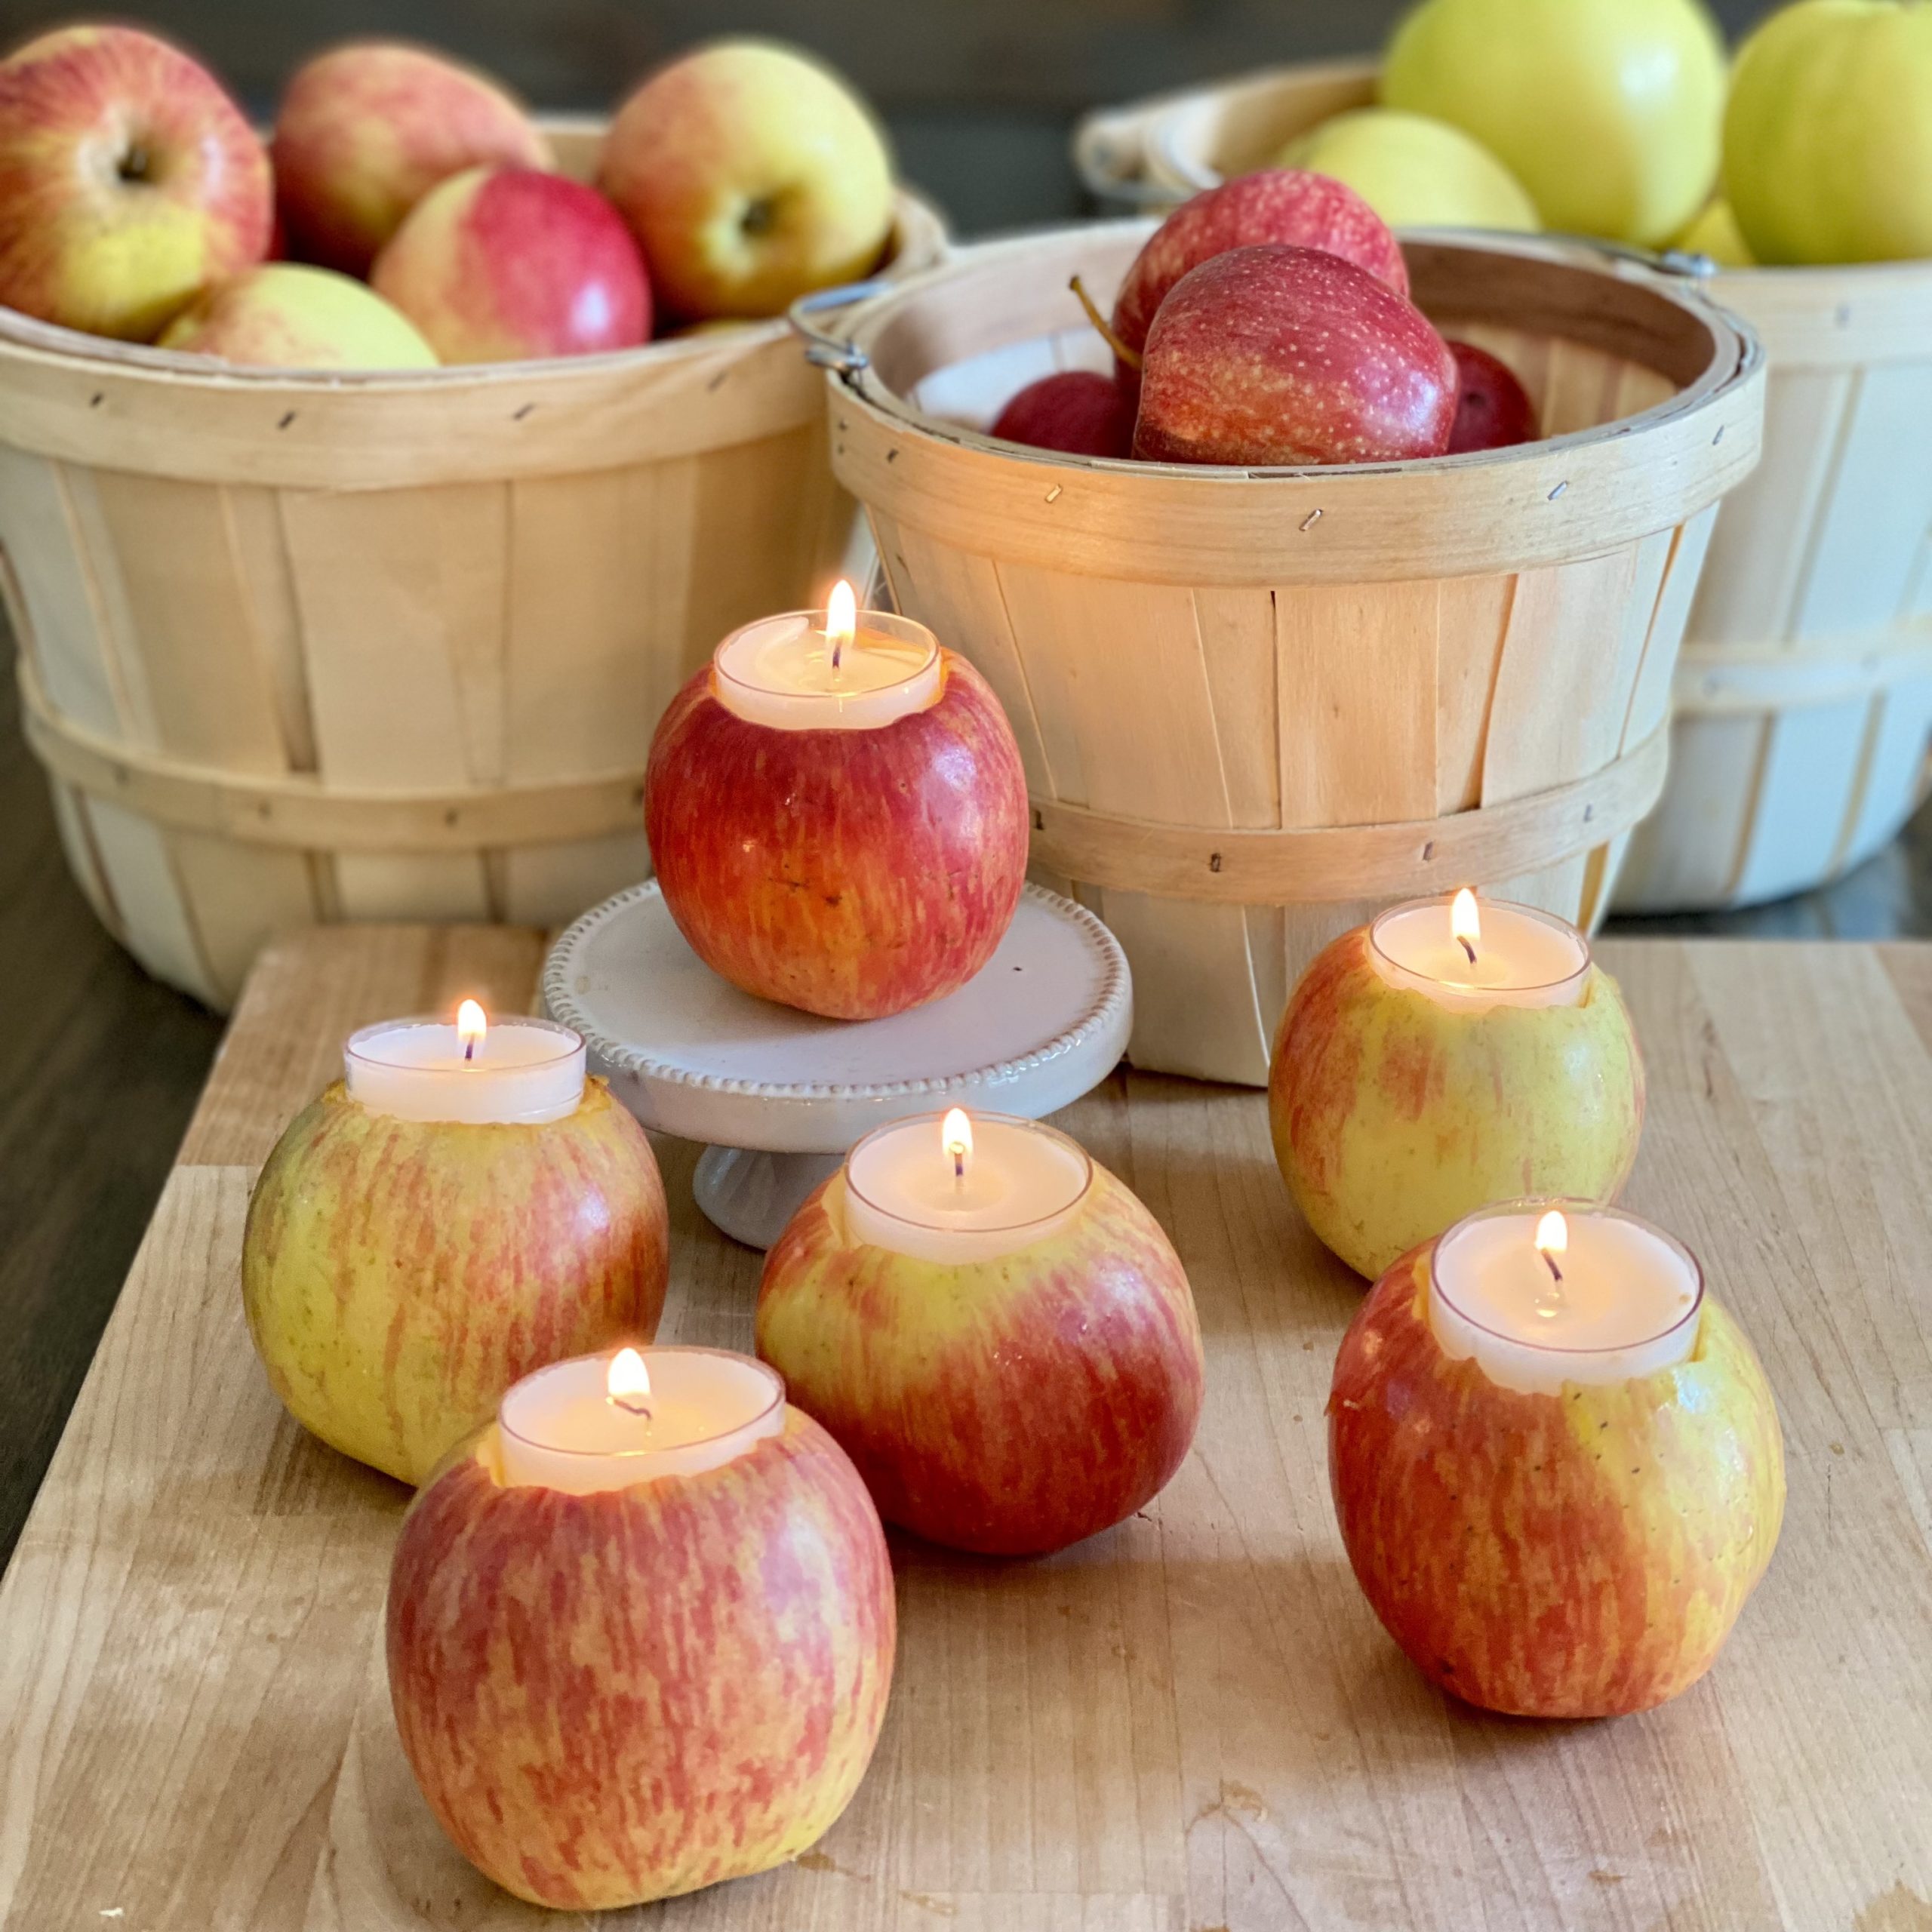 Apples cored out with votive candles on top. In the background are orchard baskets filled with apples.